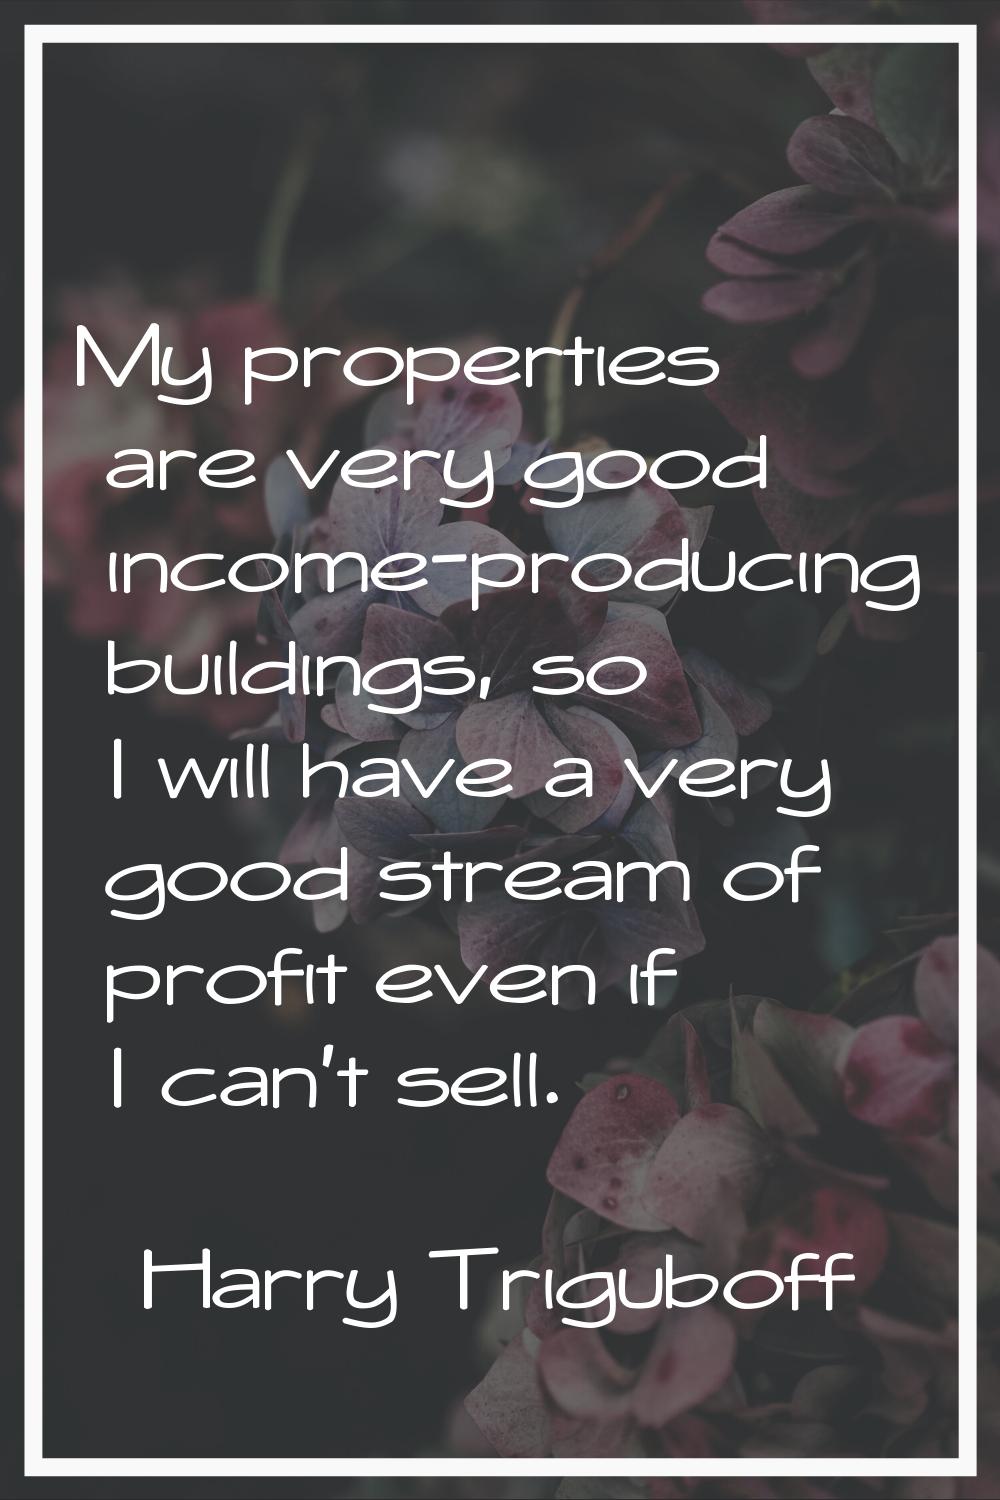 My properties are very good income-producing buildings, so I will have a very good stream of profit